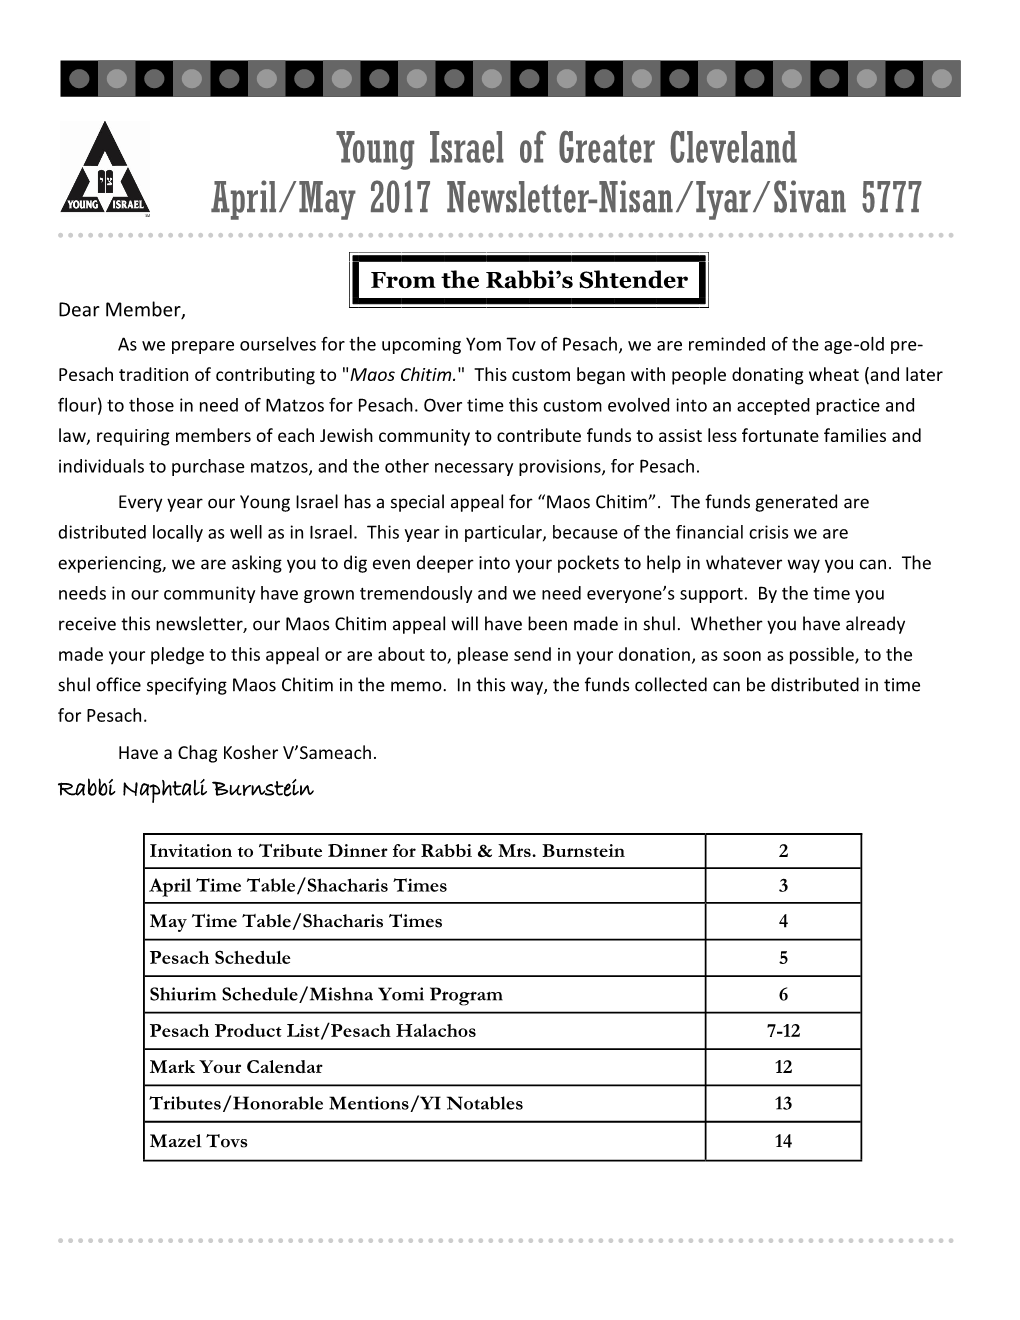 Young Israel of Greater Cleveland April/May 2017 Newsletter-Nisan/Iyar/Sivan 5777